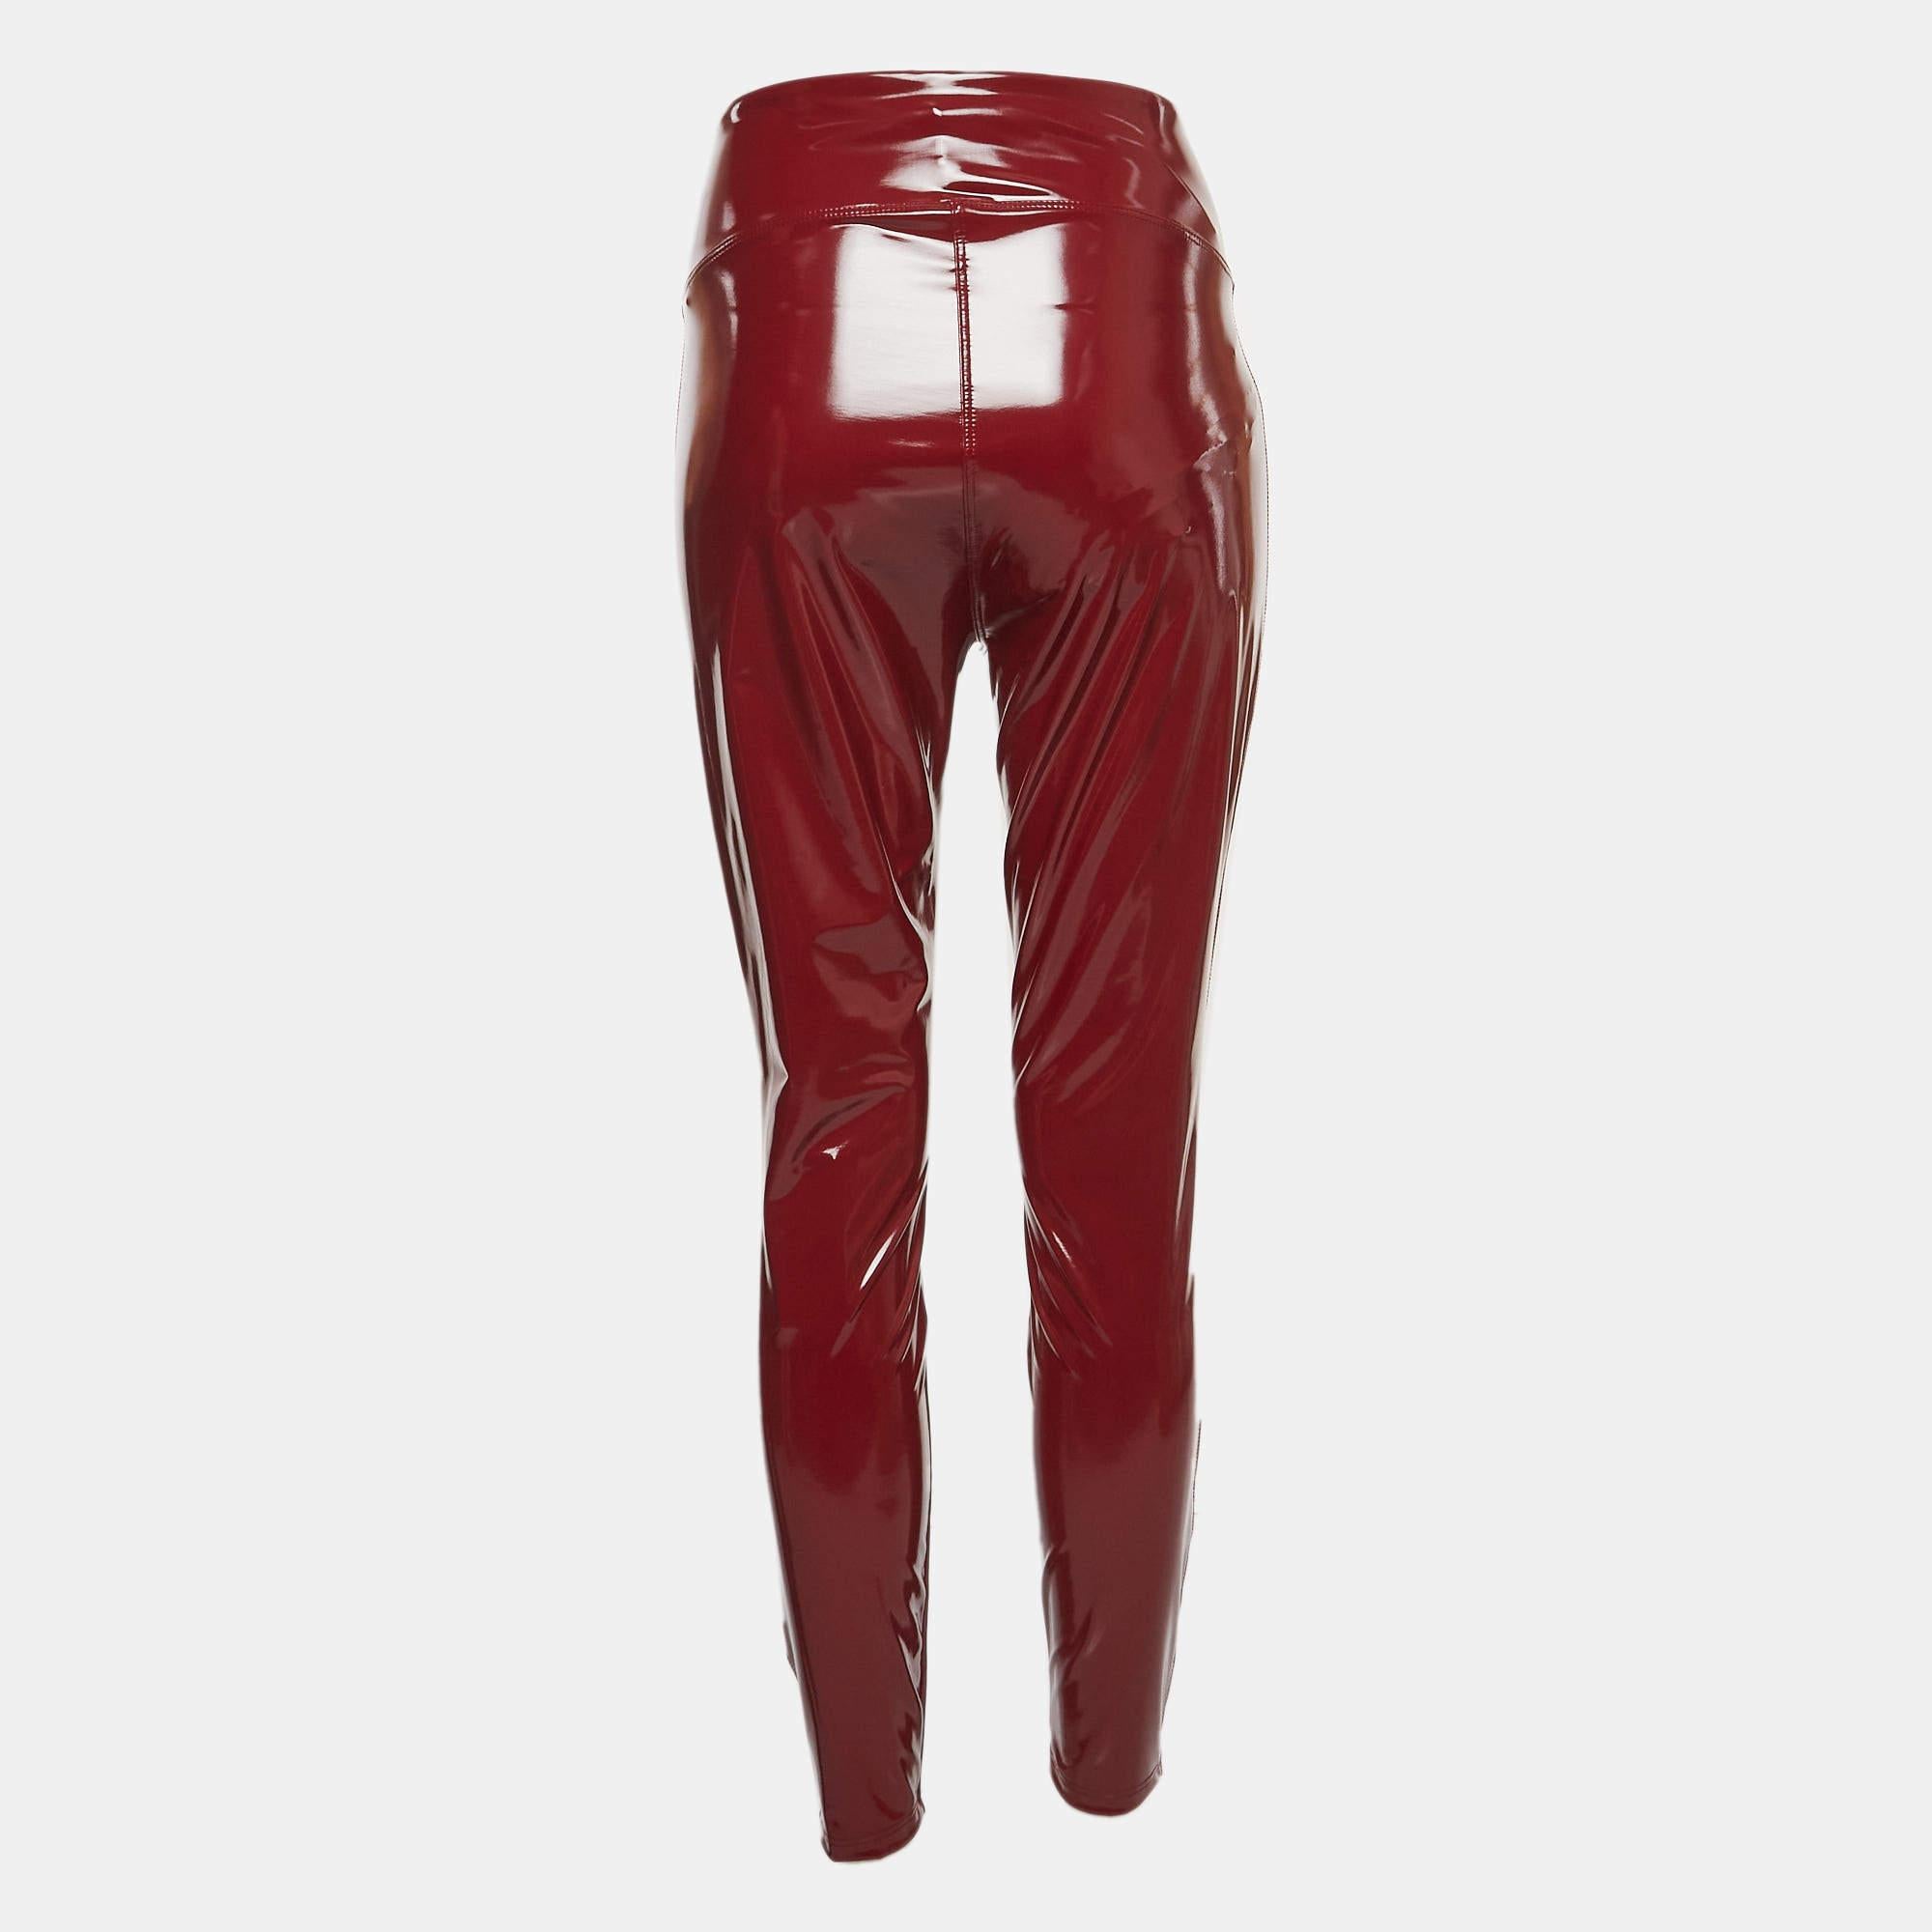 A more comfortable alternative to jeans or pants, leggings are a closet must-have. This Heroine Sport design is made from faux leather and cut to offer a great fit. The pair is presented in a stunning red.

